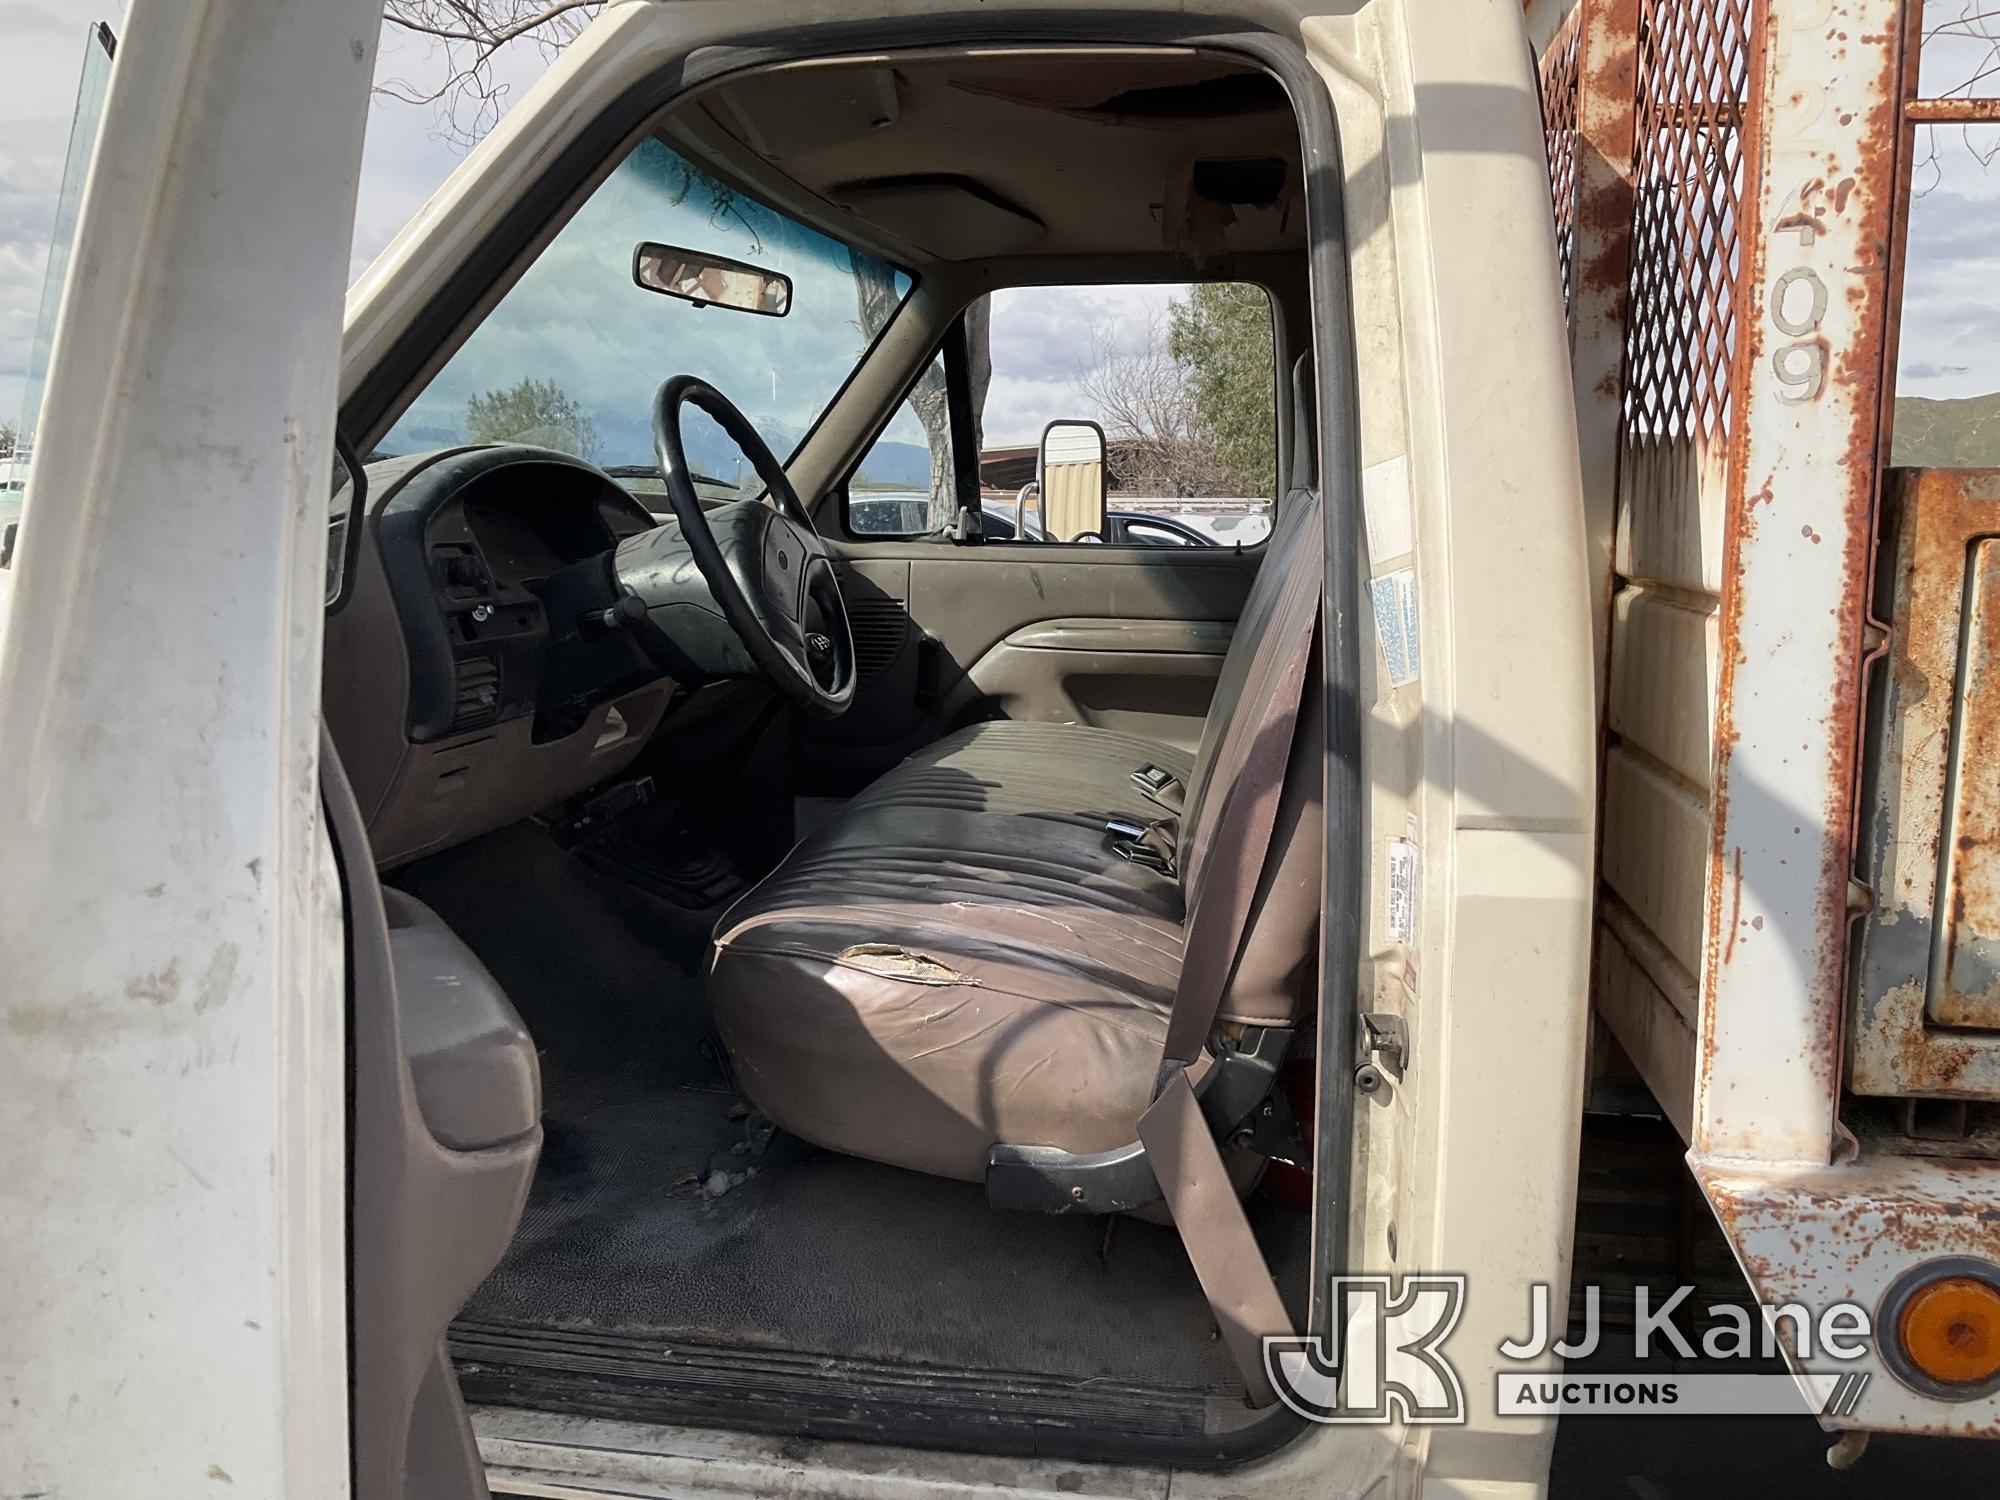 (Jurupa Valley, CA) 1997 Ford F-350 Stake Truck Runs & Moves With Jump, Bad Charging System